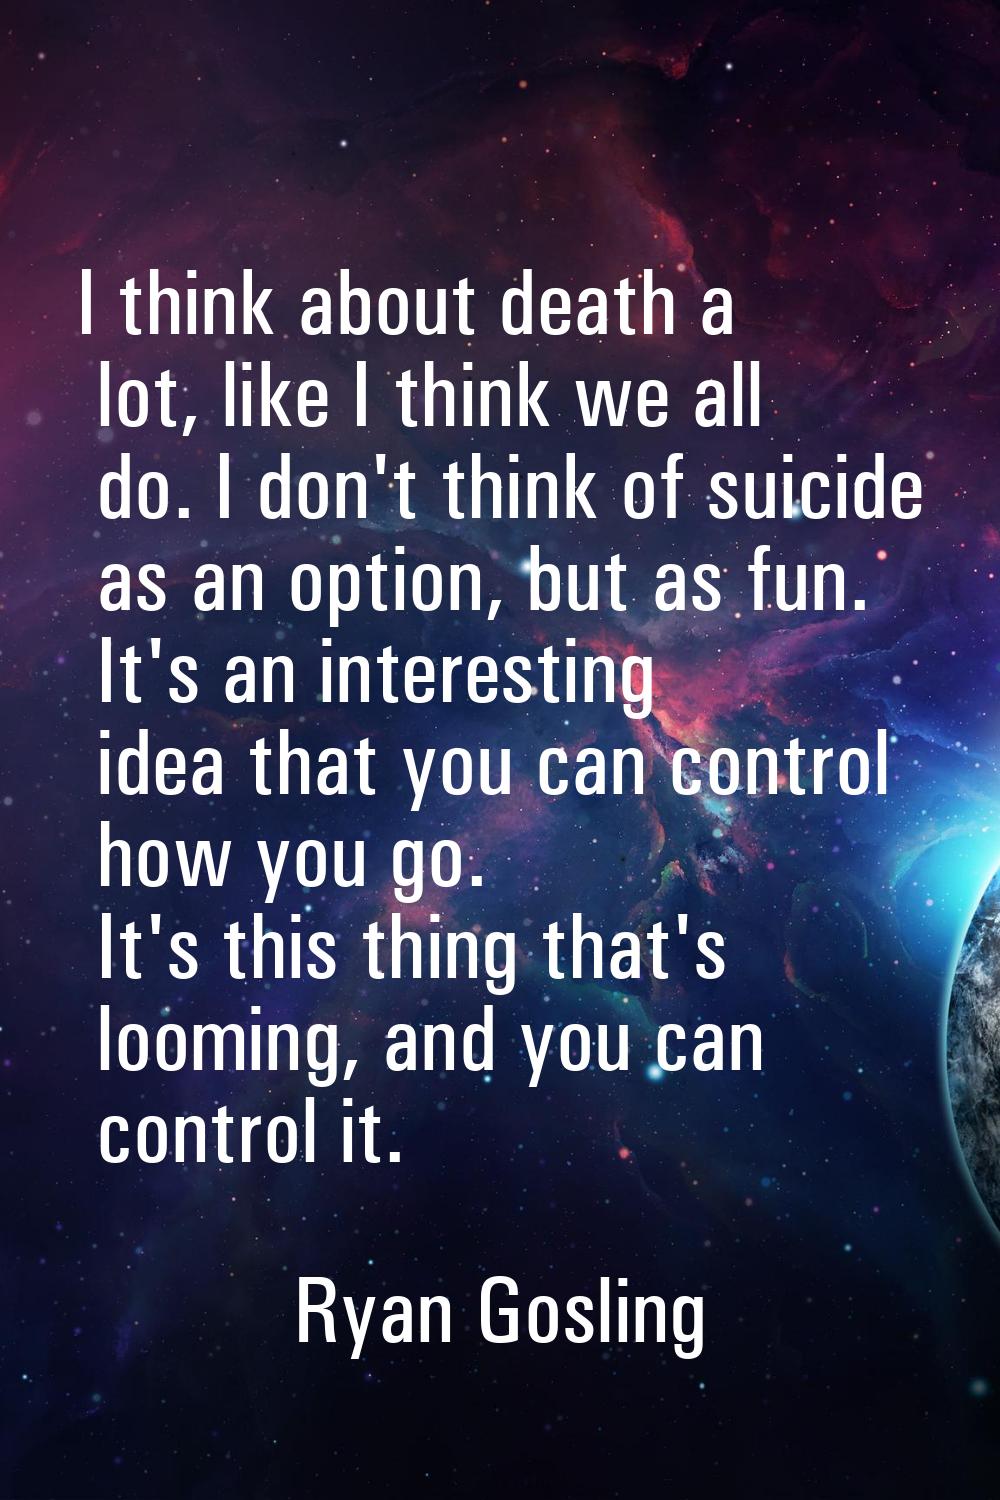 I think about death a lot, like I think we all do. I don't think of suicide as an option, but as fu